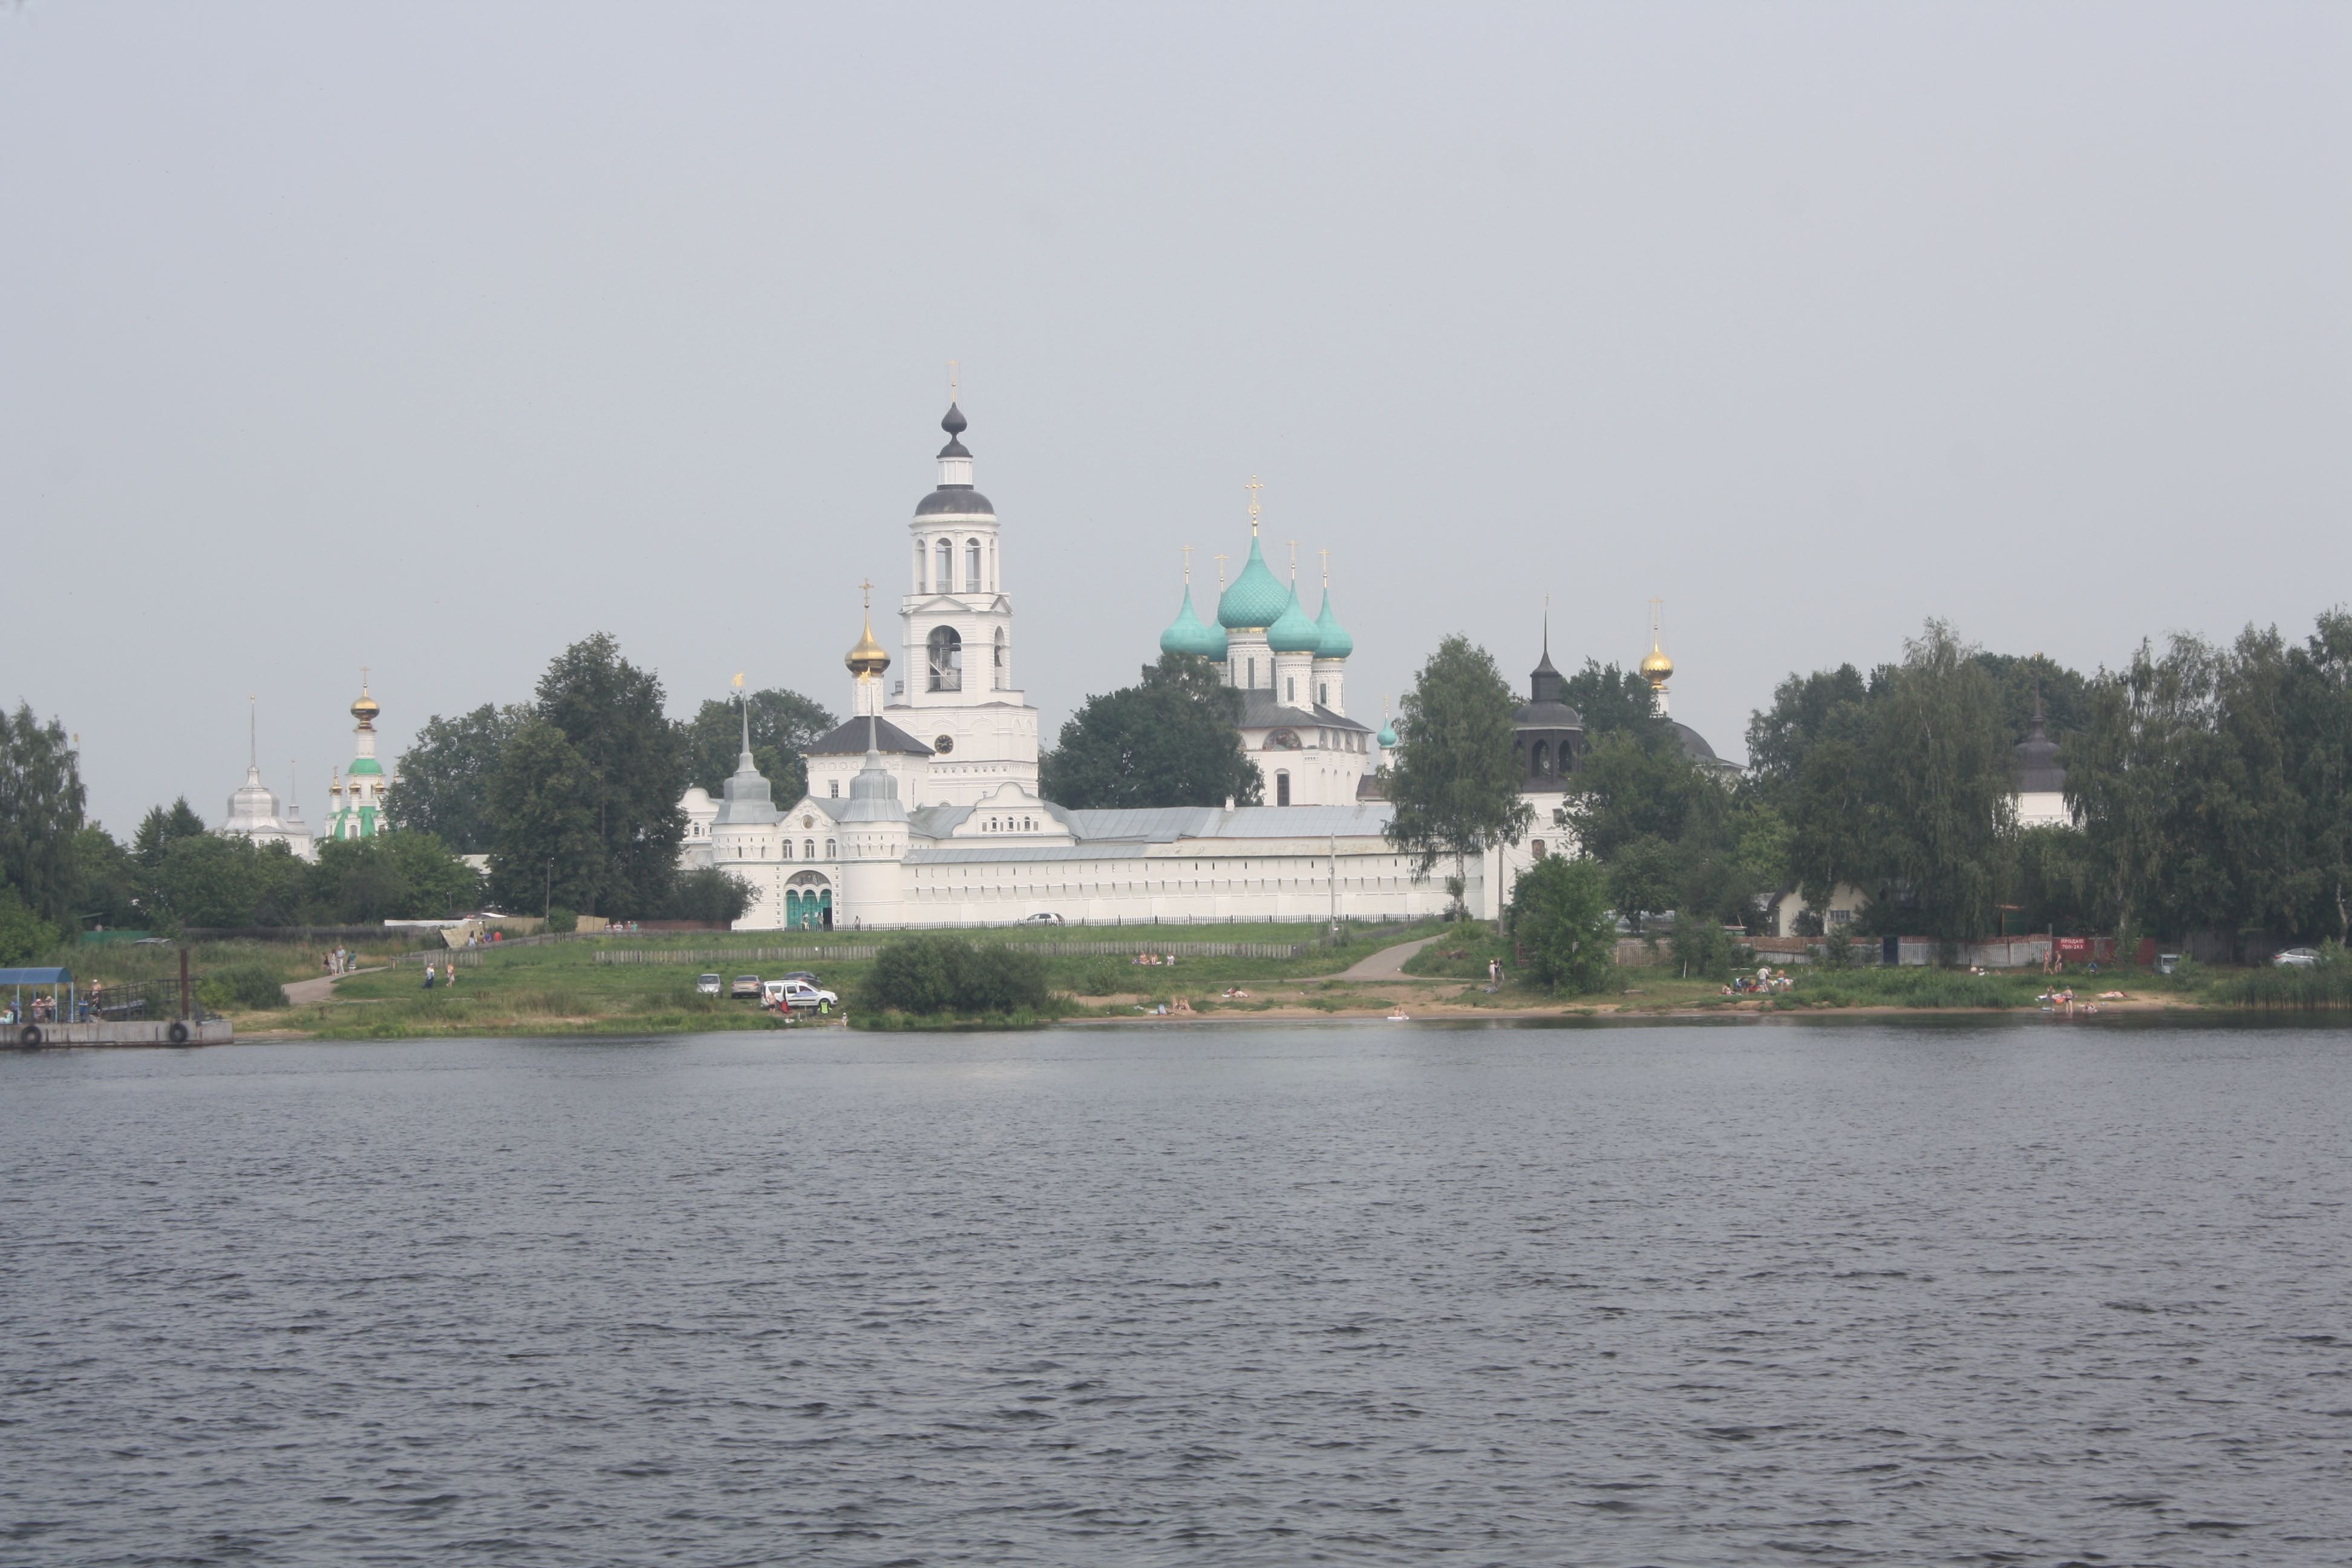 The historic city of Yaroslavl was founded in 1006 and is the oldest continuously inhabited city by the Volga River. 